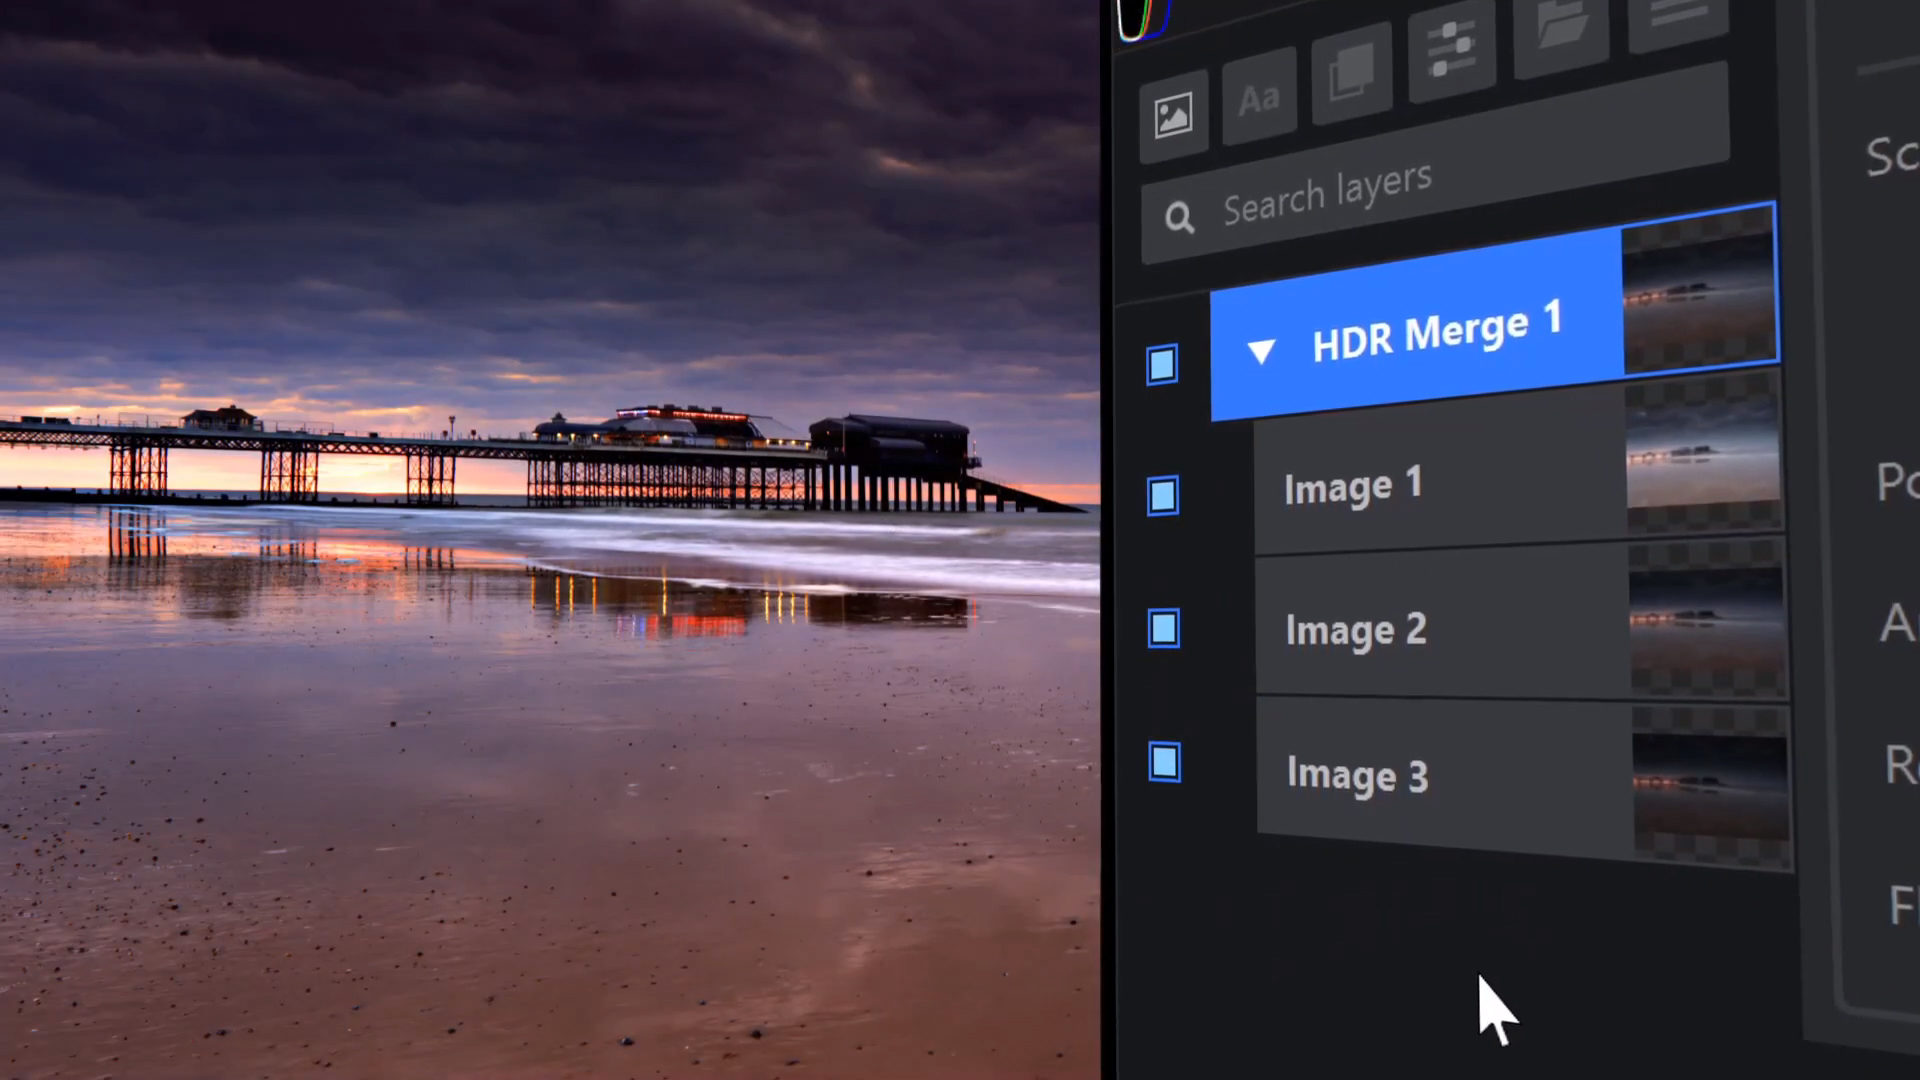 HDR merging in Imerge Pro 7 interface - Imerge Pro 7 release